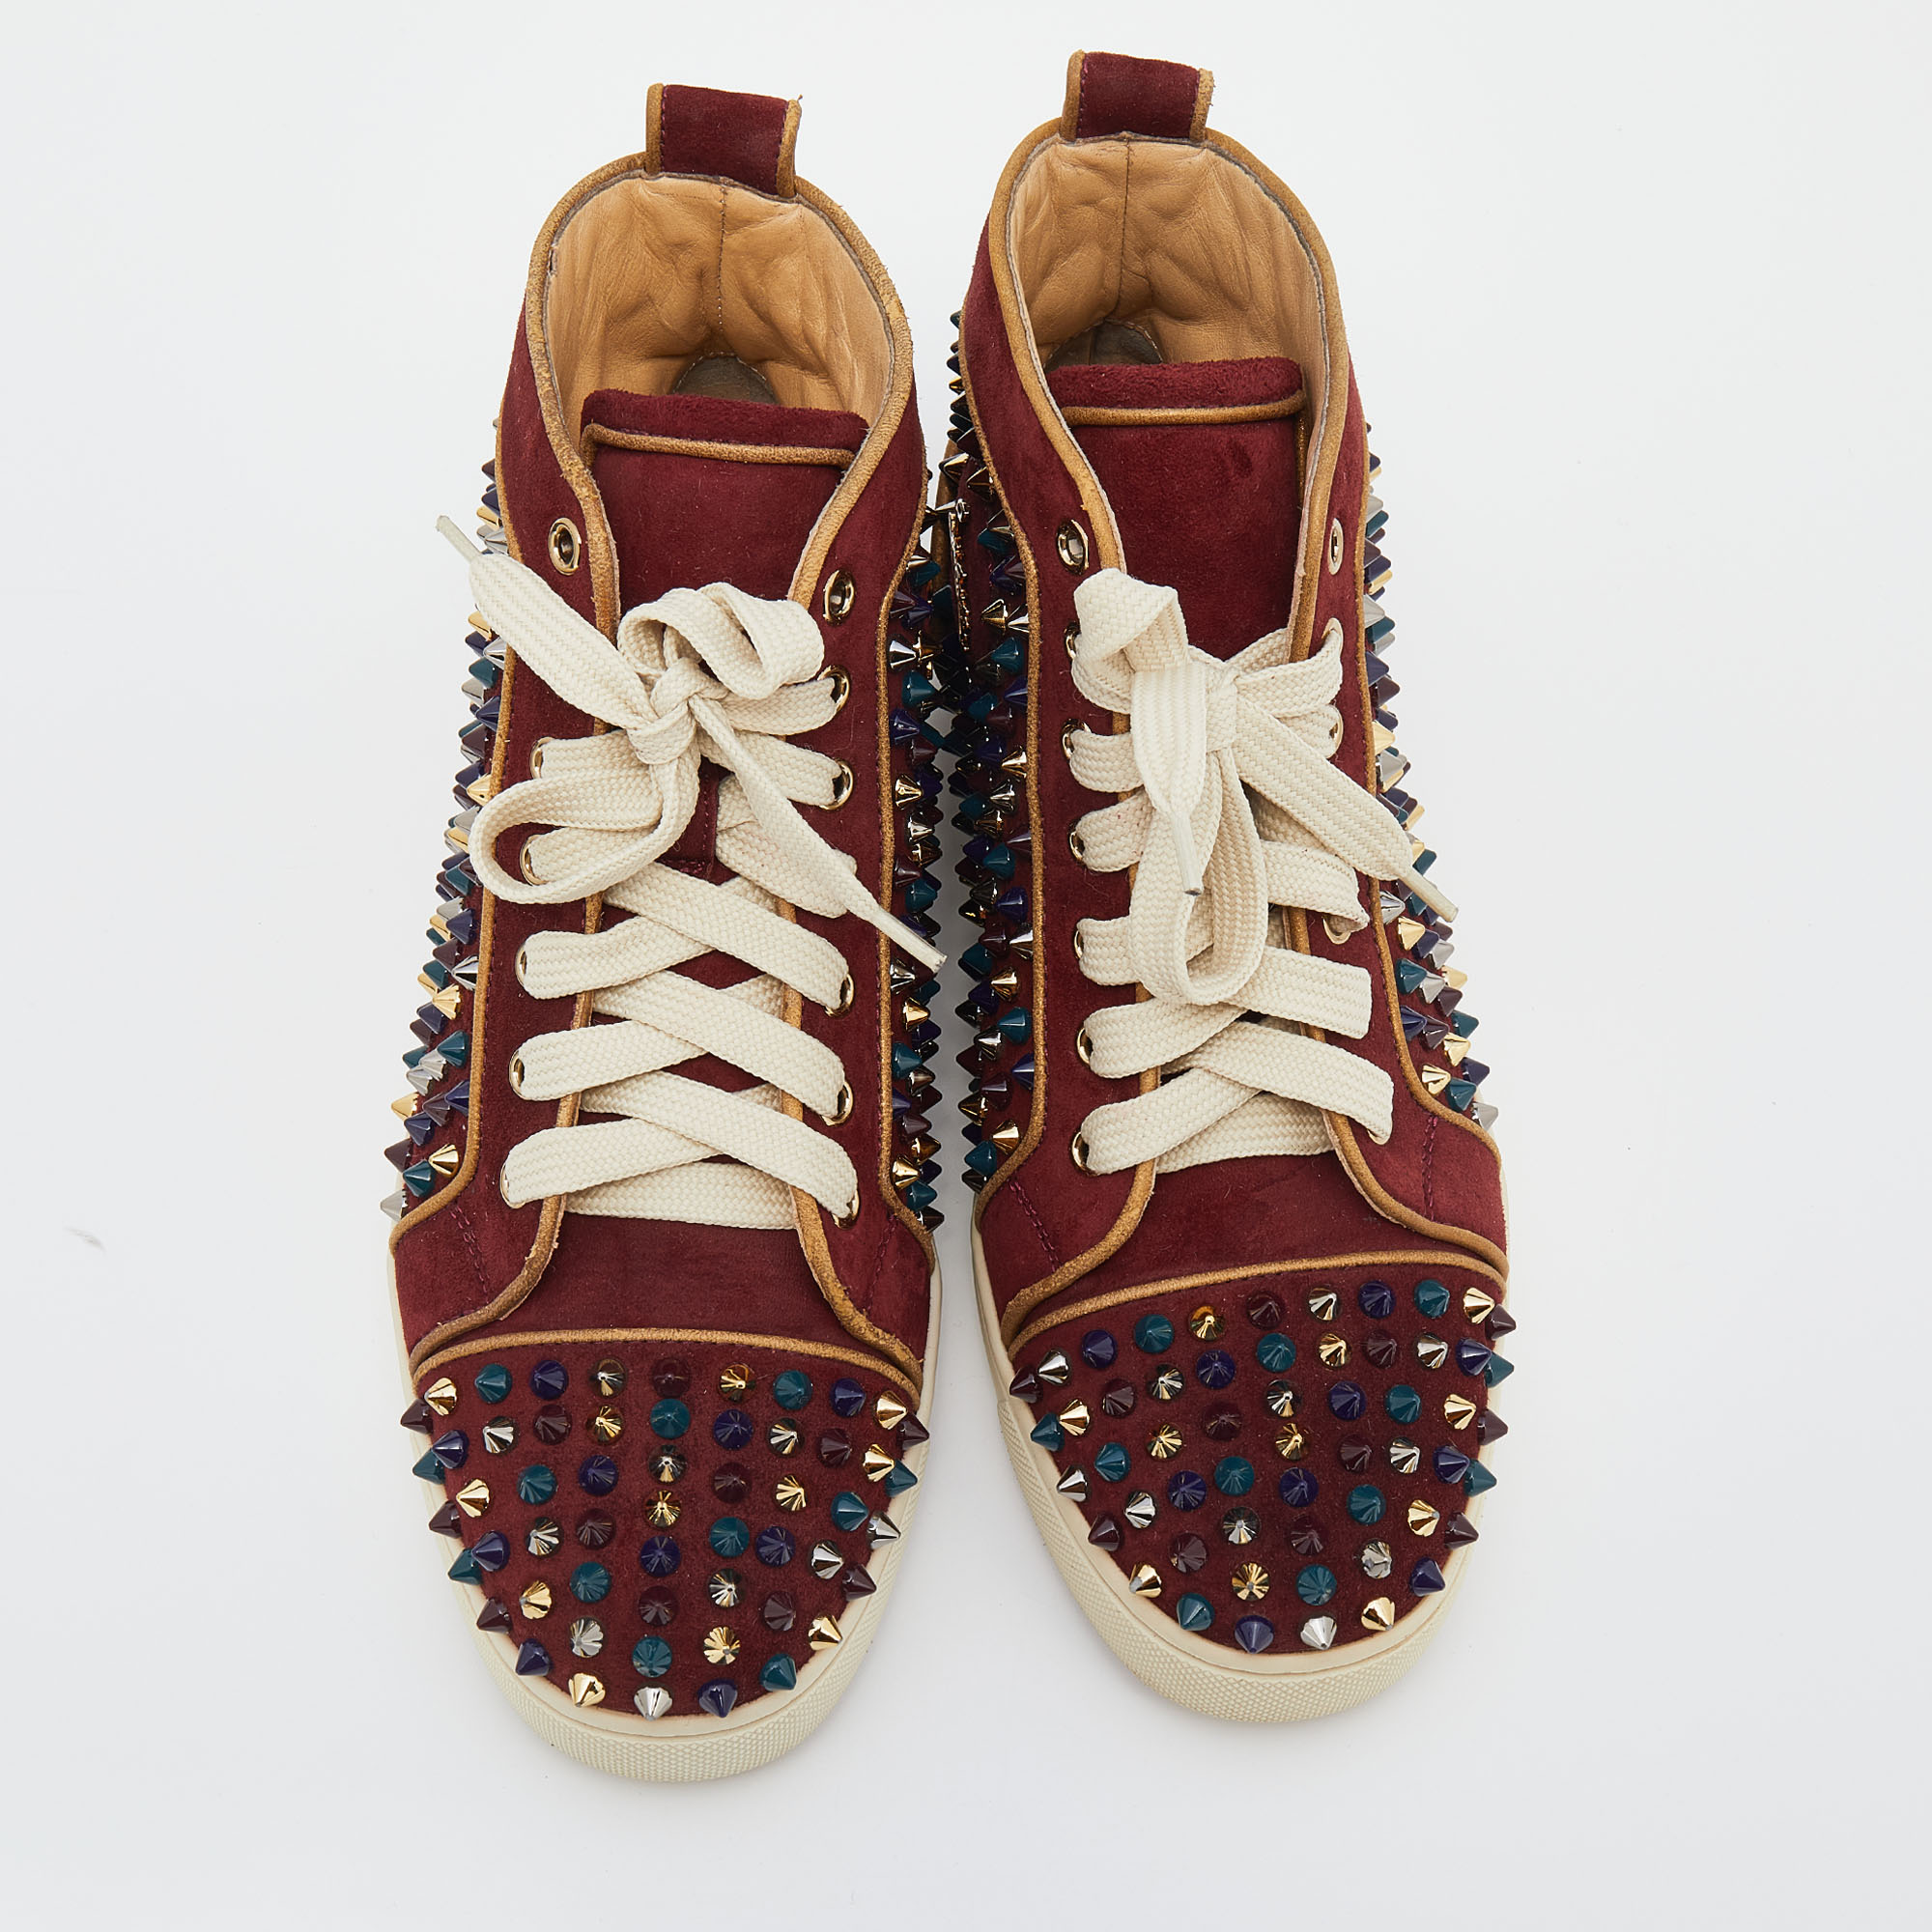 Christian Louboutin Burgundy Suede Louis Spikes High Top Sneakers Size 37.5